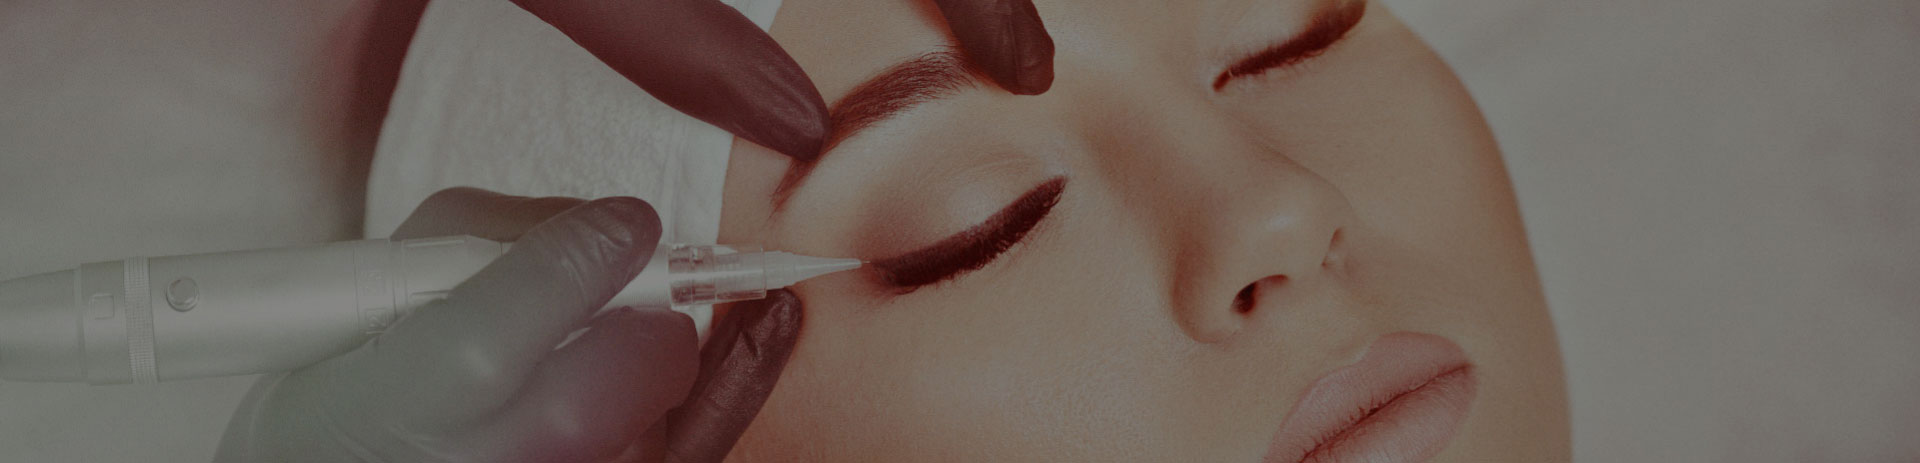 Best Rated Permanent Make-Up Salon in Davie, Florida